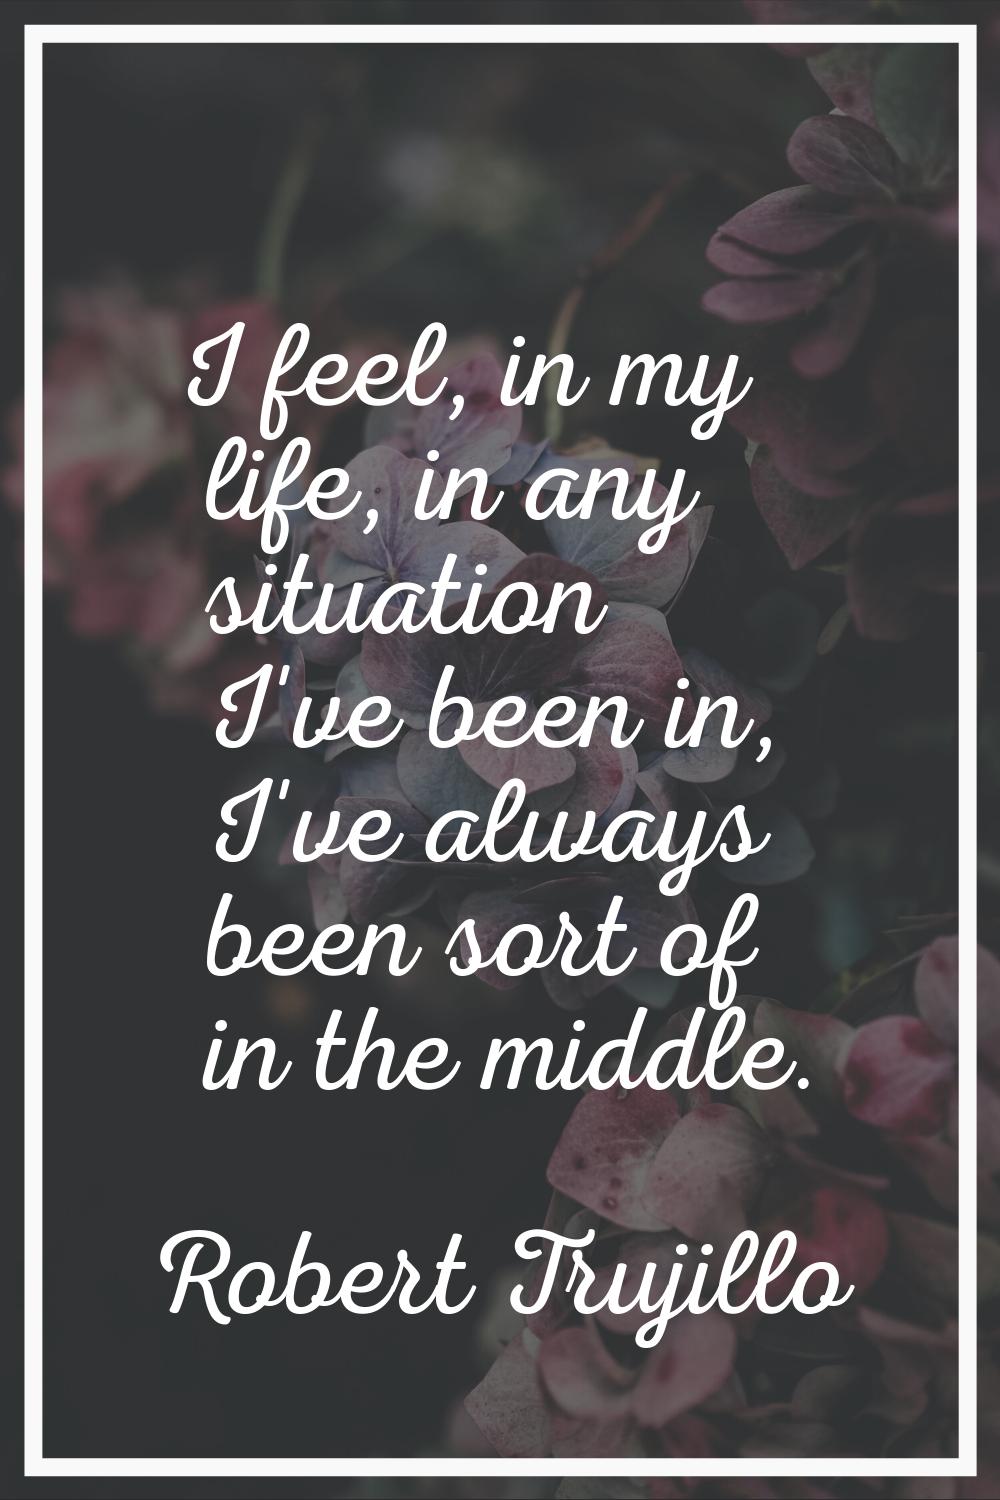 I feel, in my life, in any situation I've been in, I've always been sort of in the middle.